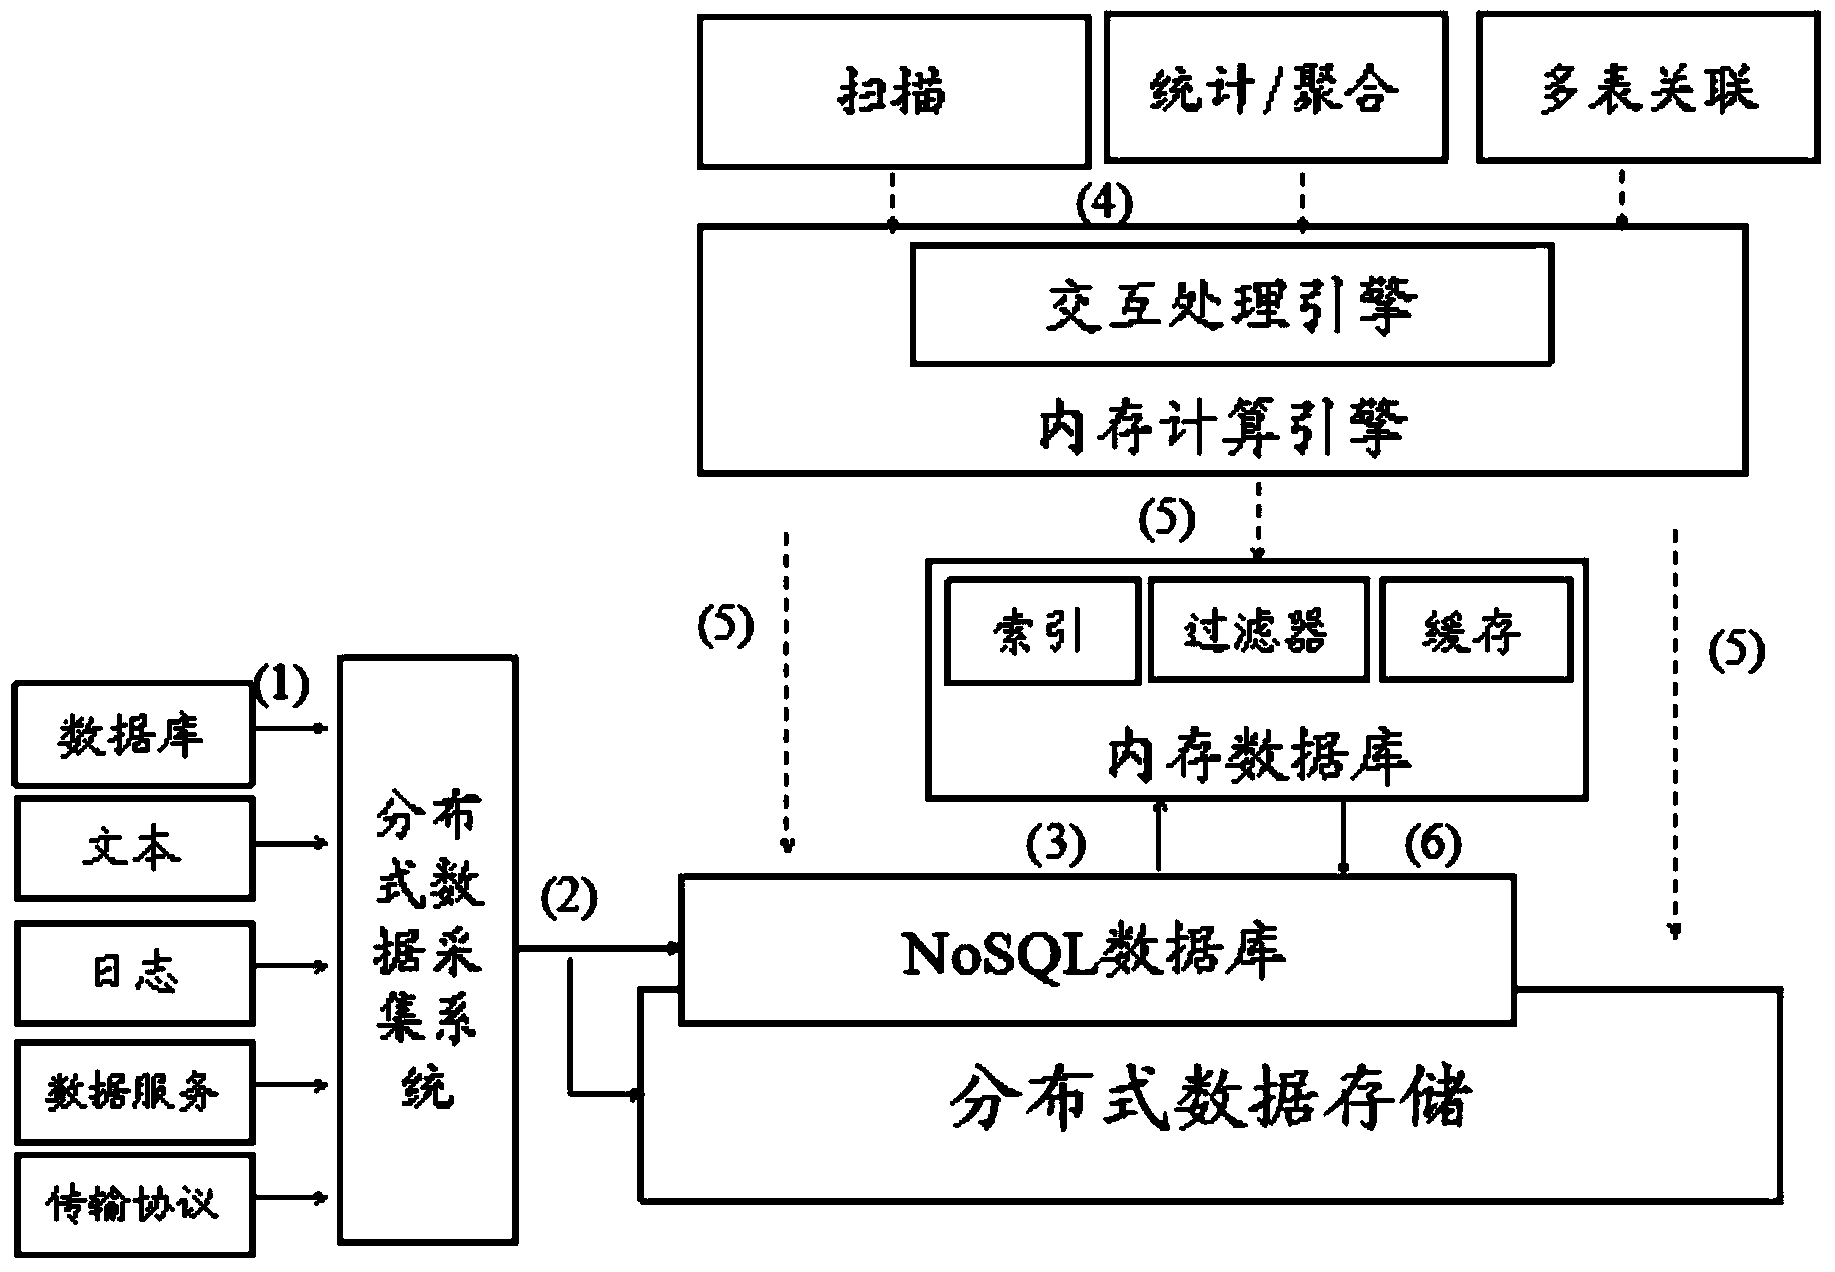 Mixed type processing system and method oriented to industry big data diversity application